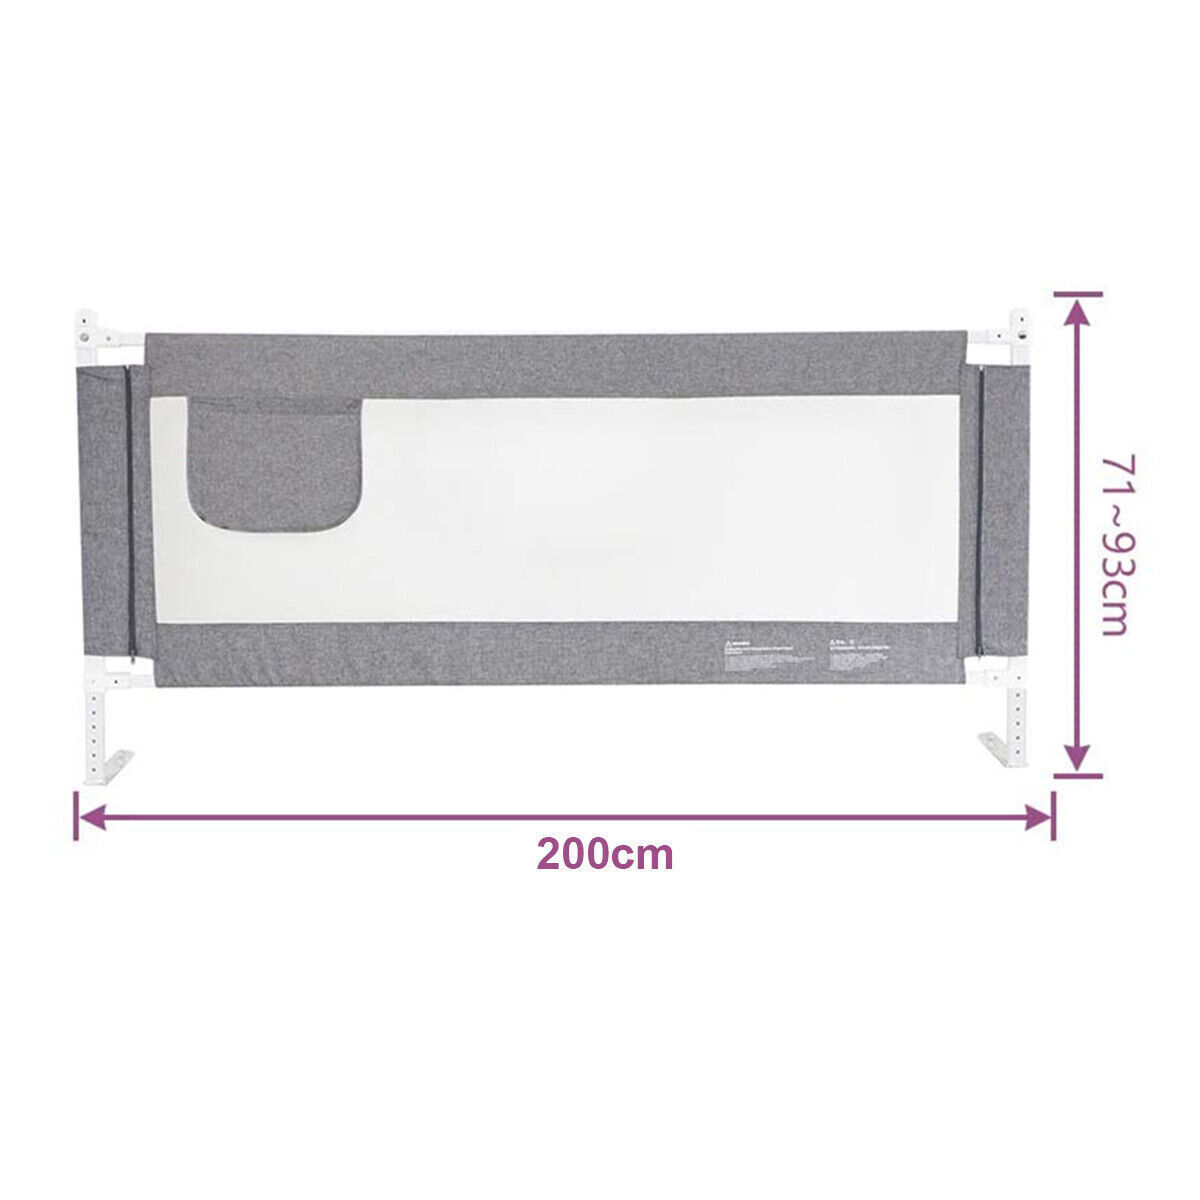 200cm Bed Safety Guard Folding Child Toddler Bed Rail Safety Protection Guard UK